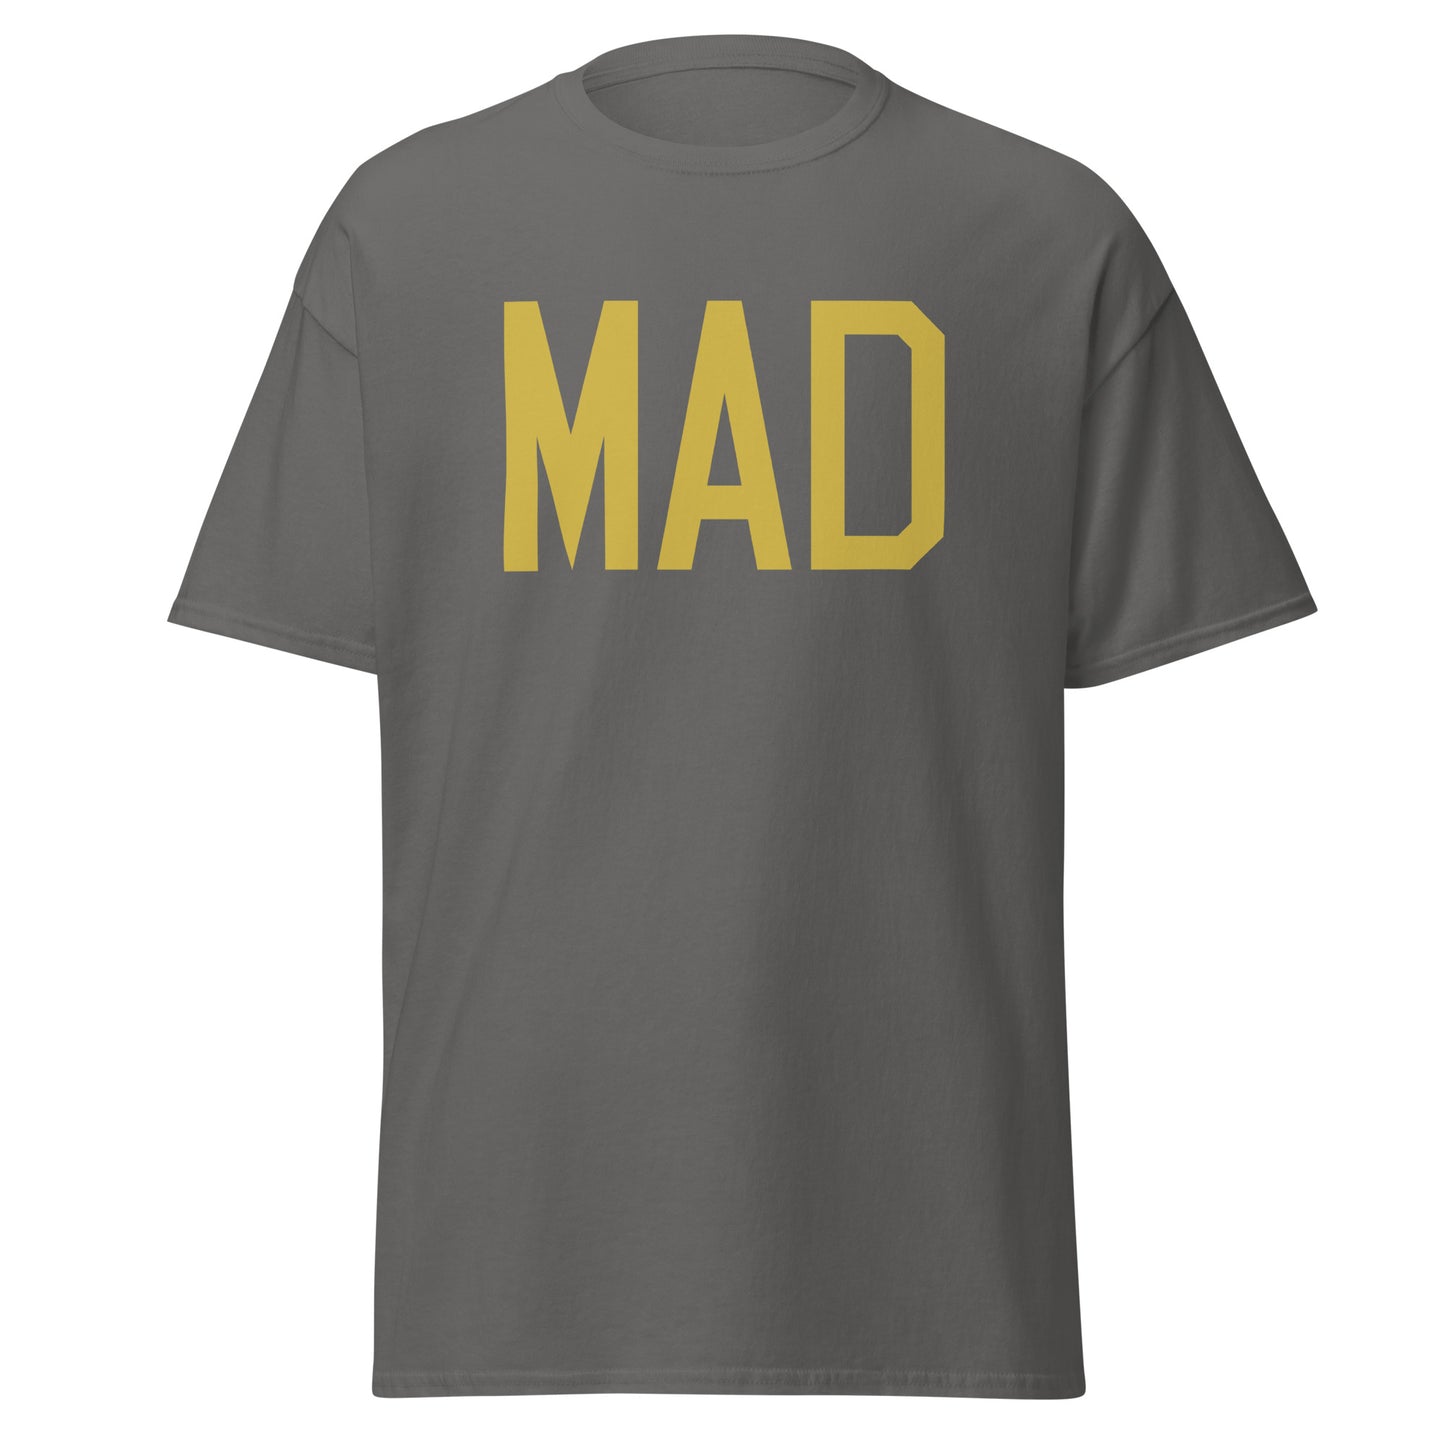 Aviation Enthusiast Men's Tee - Old Gold Graphic • MAD Madrid • YHM Designs - Image 05